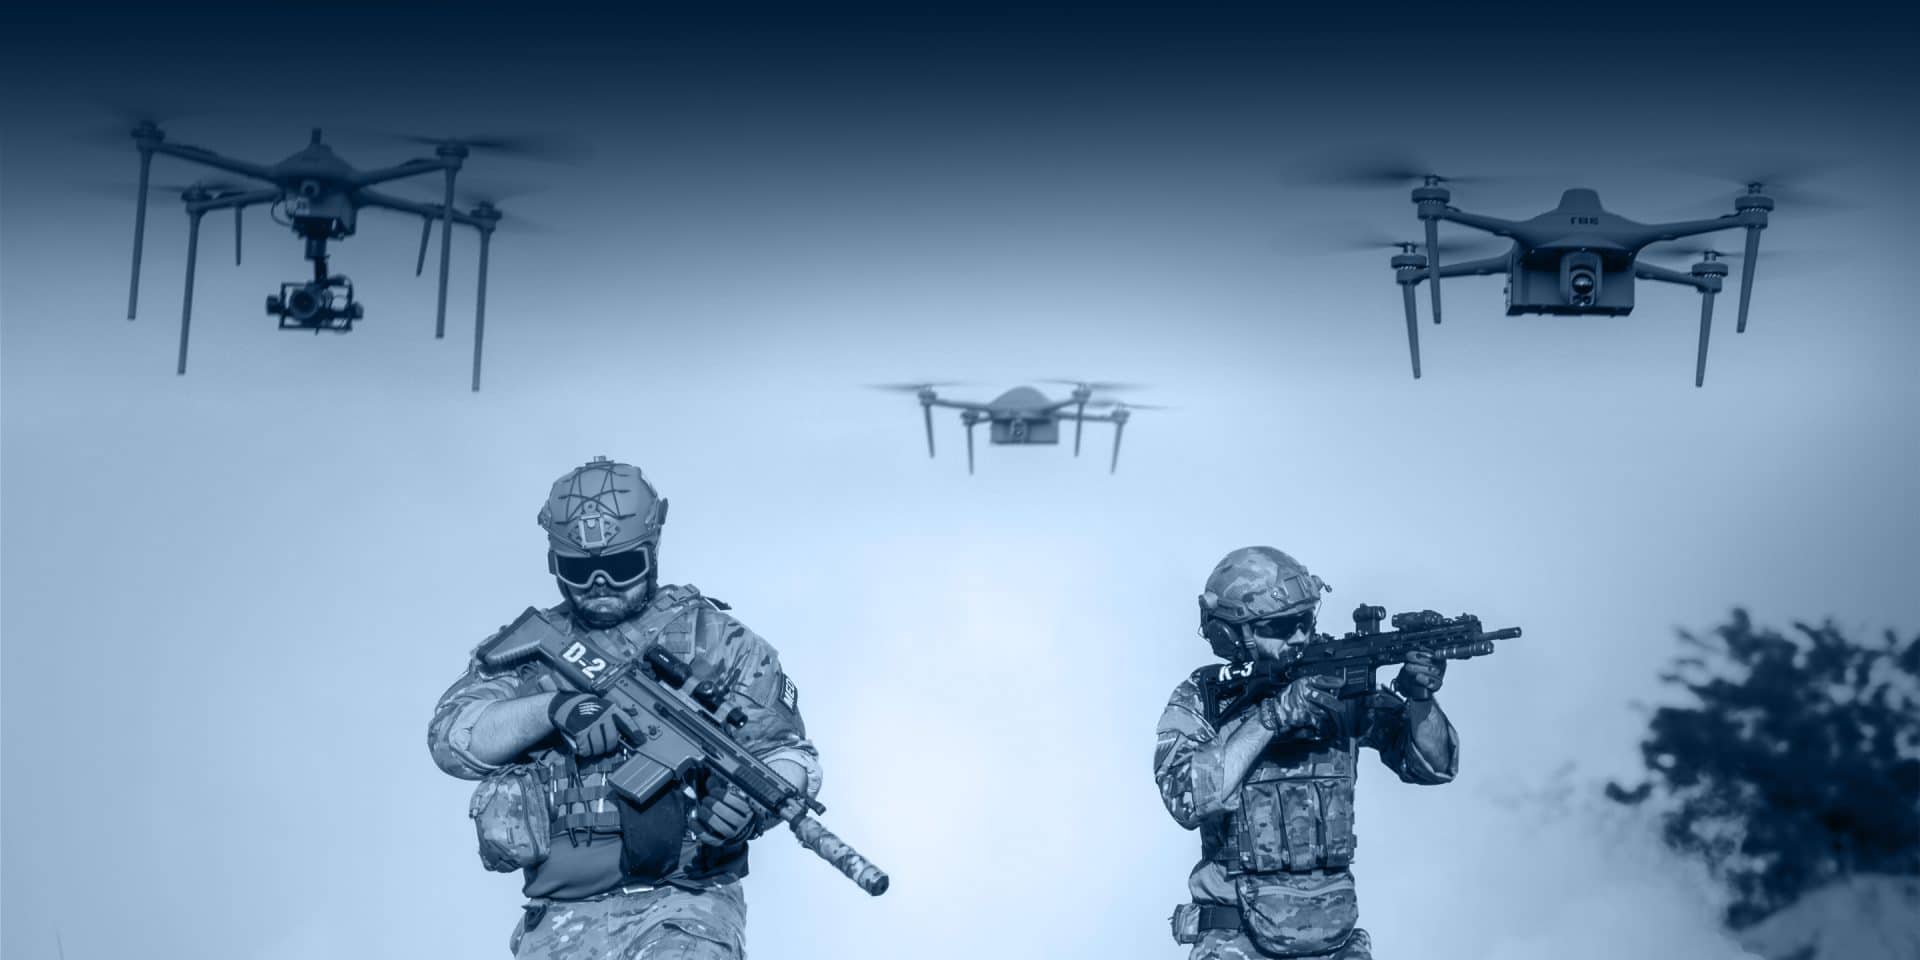 ISTAR Military Drones from the Martlet UAS Series with Special Operation Forces